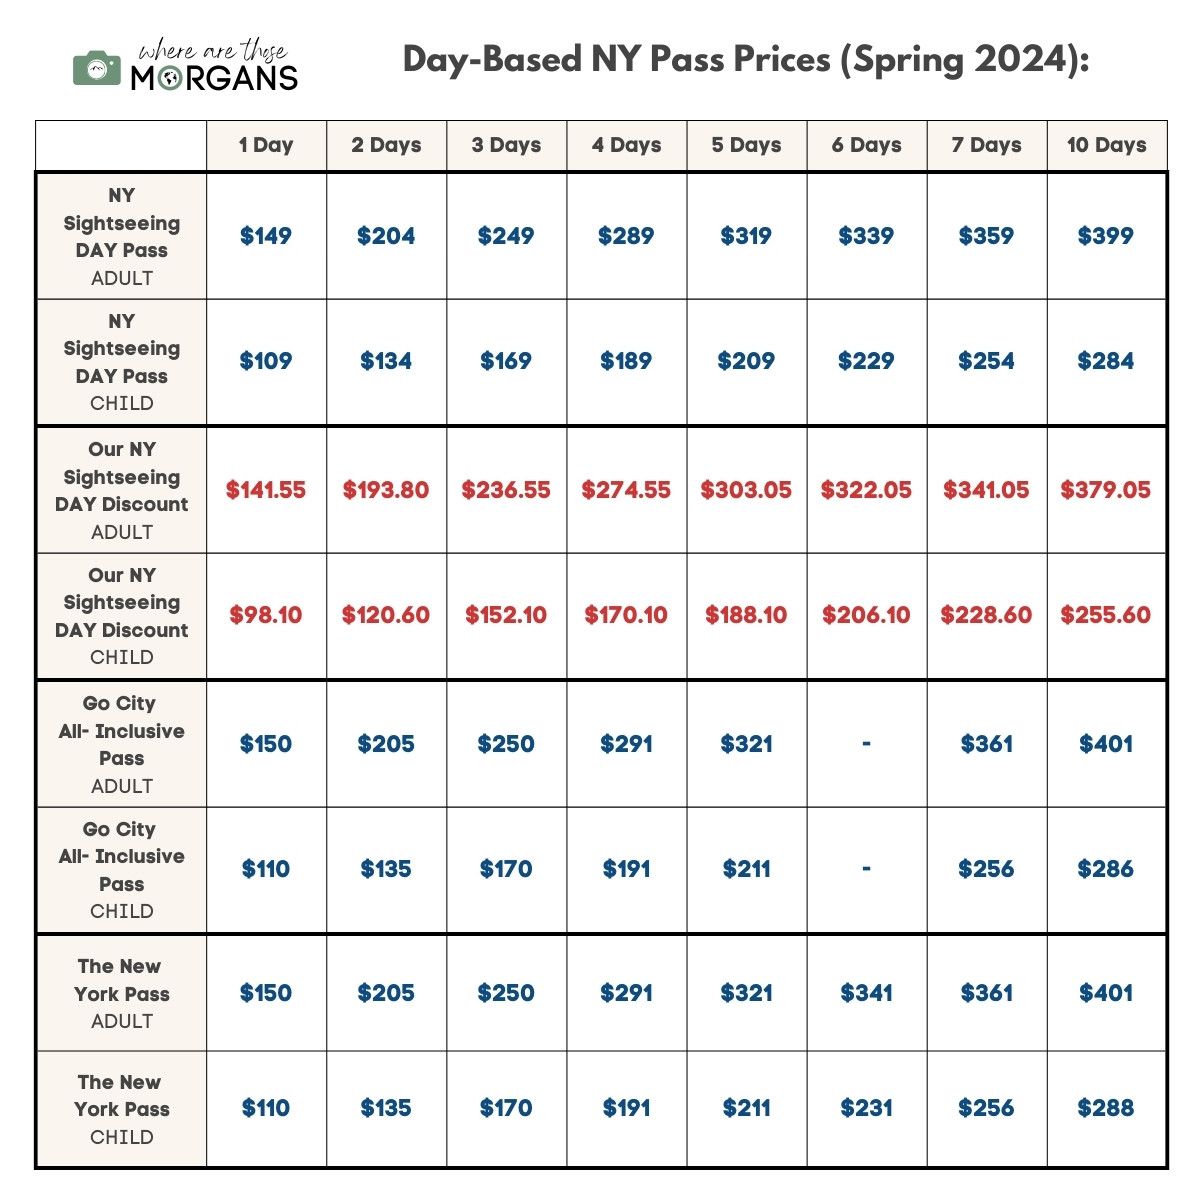 Price comparison for the day based NY passes